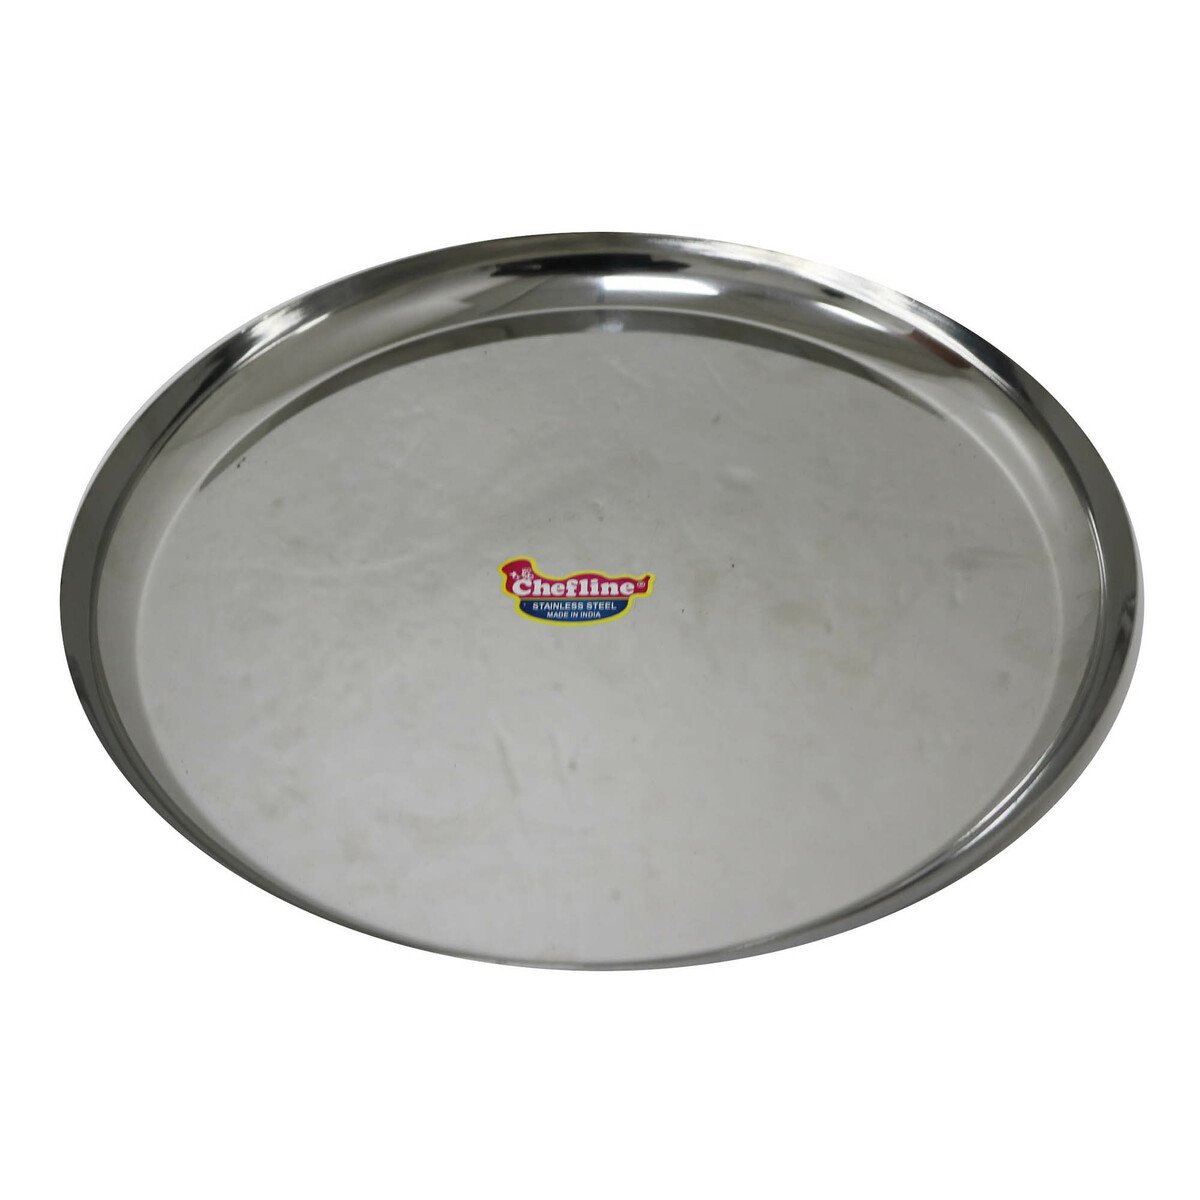 Chefline Stainless Steel Halwa Plate No.9 Ind